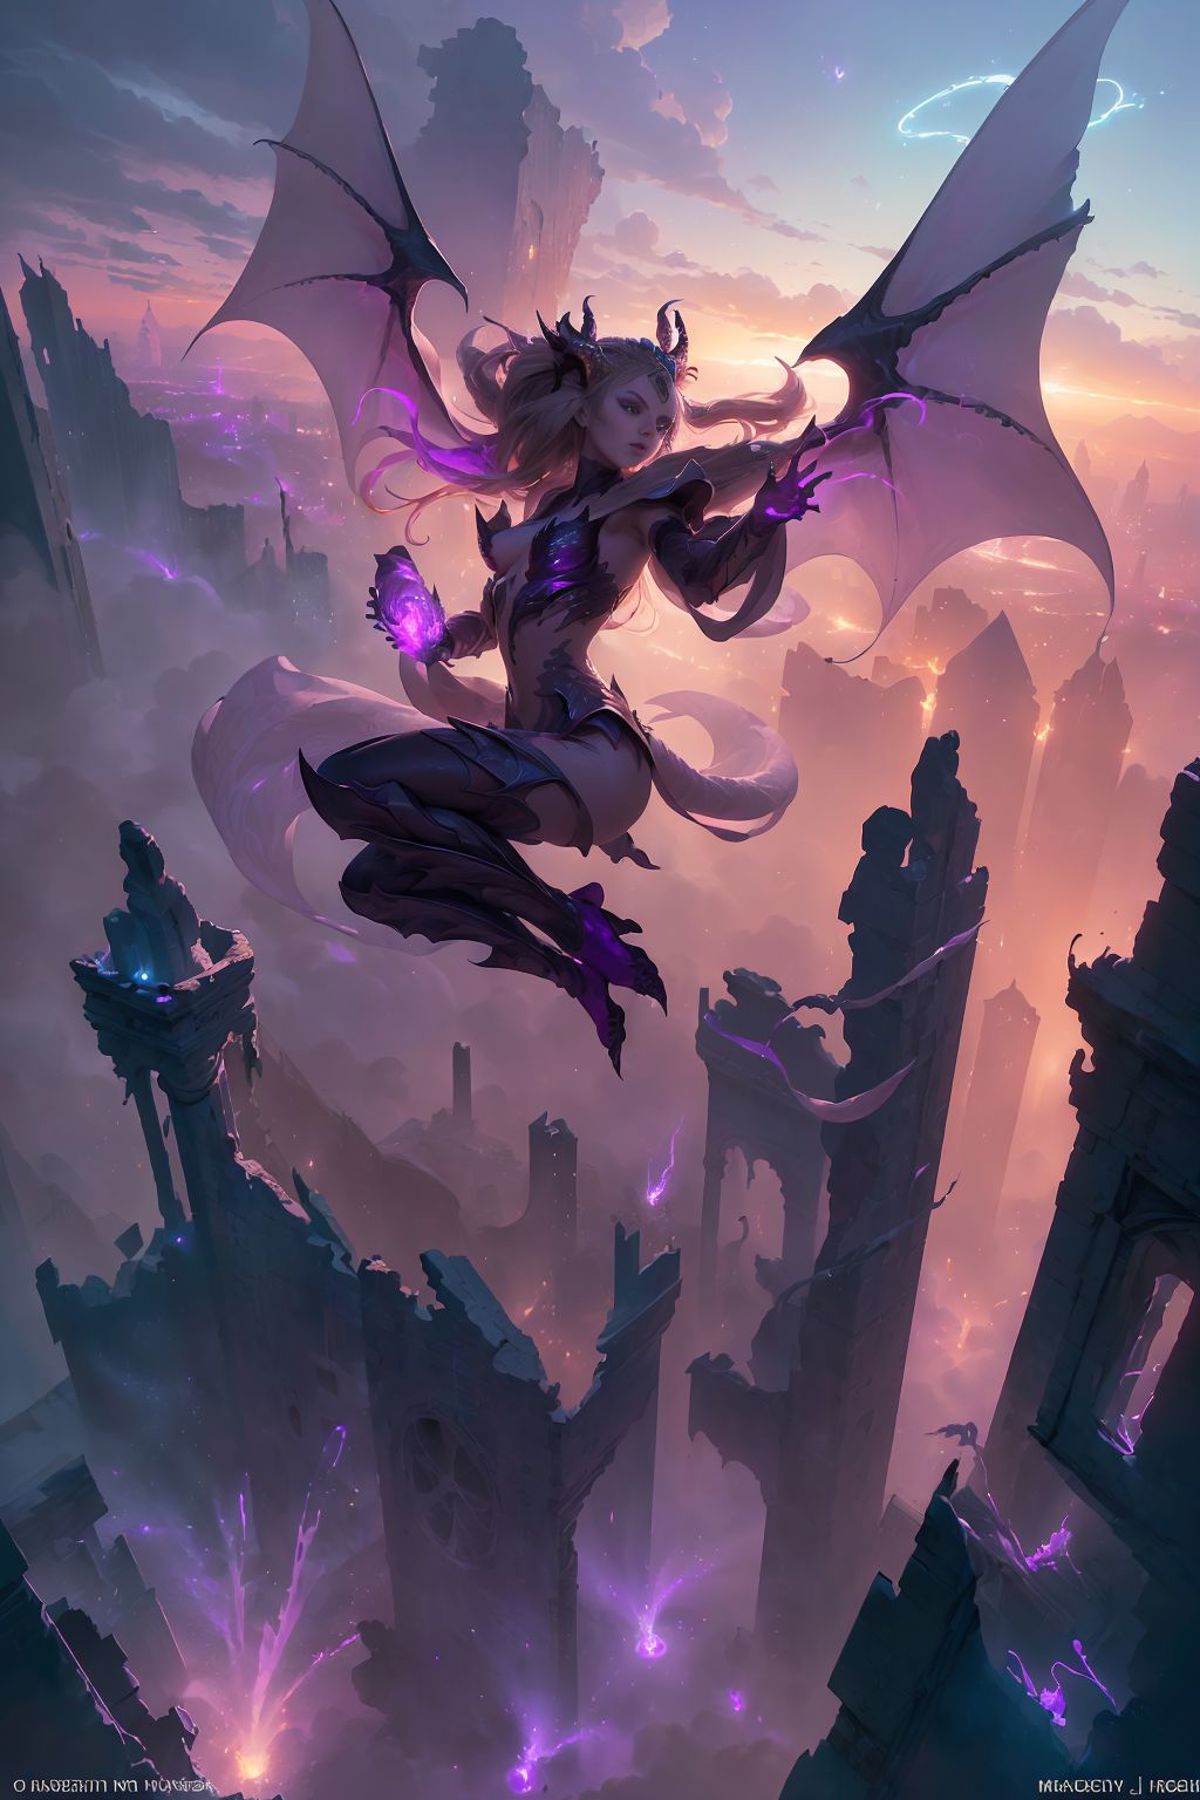 Zyra Dragon Sorceress | League of Legends image by ChaosOrchestrator